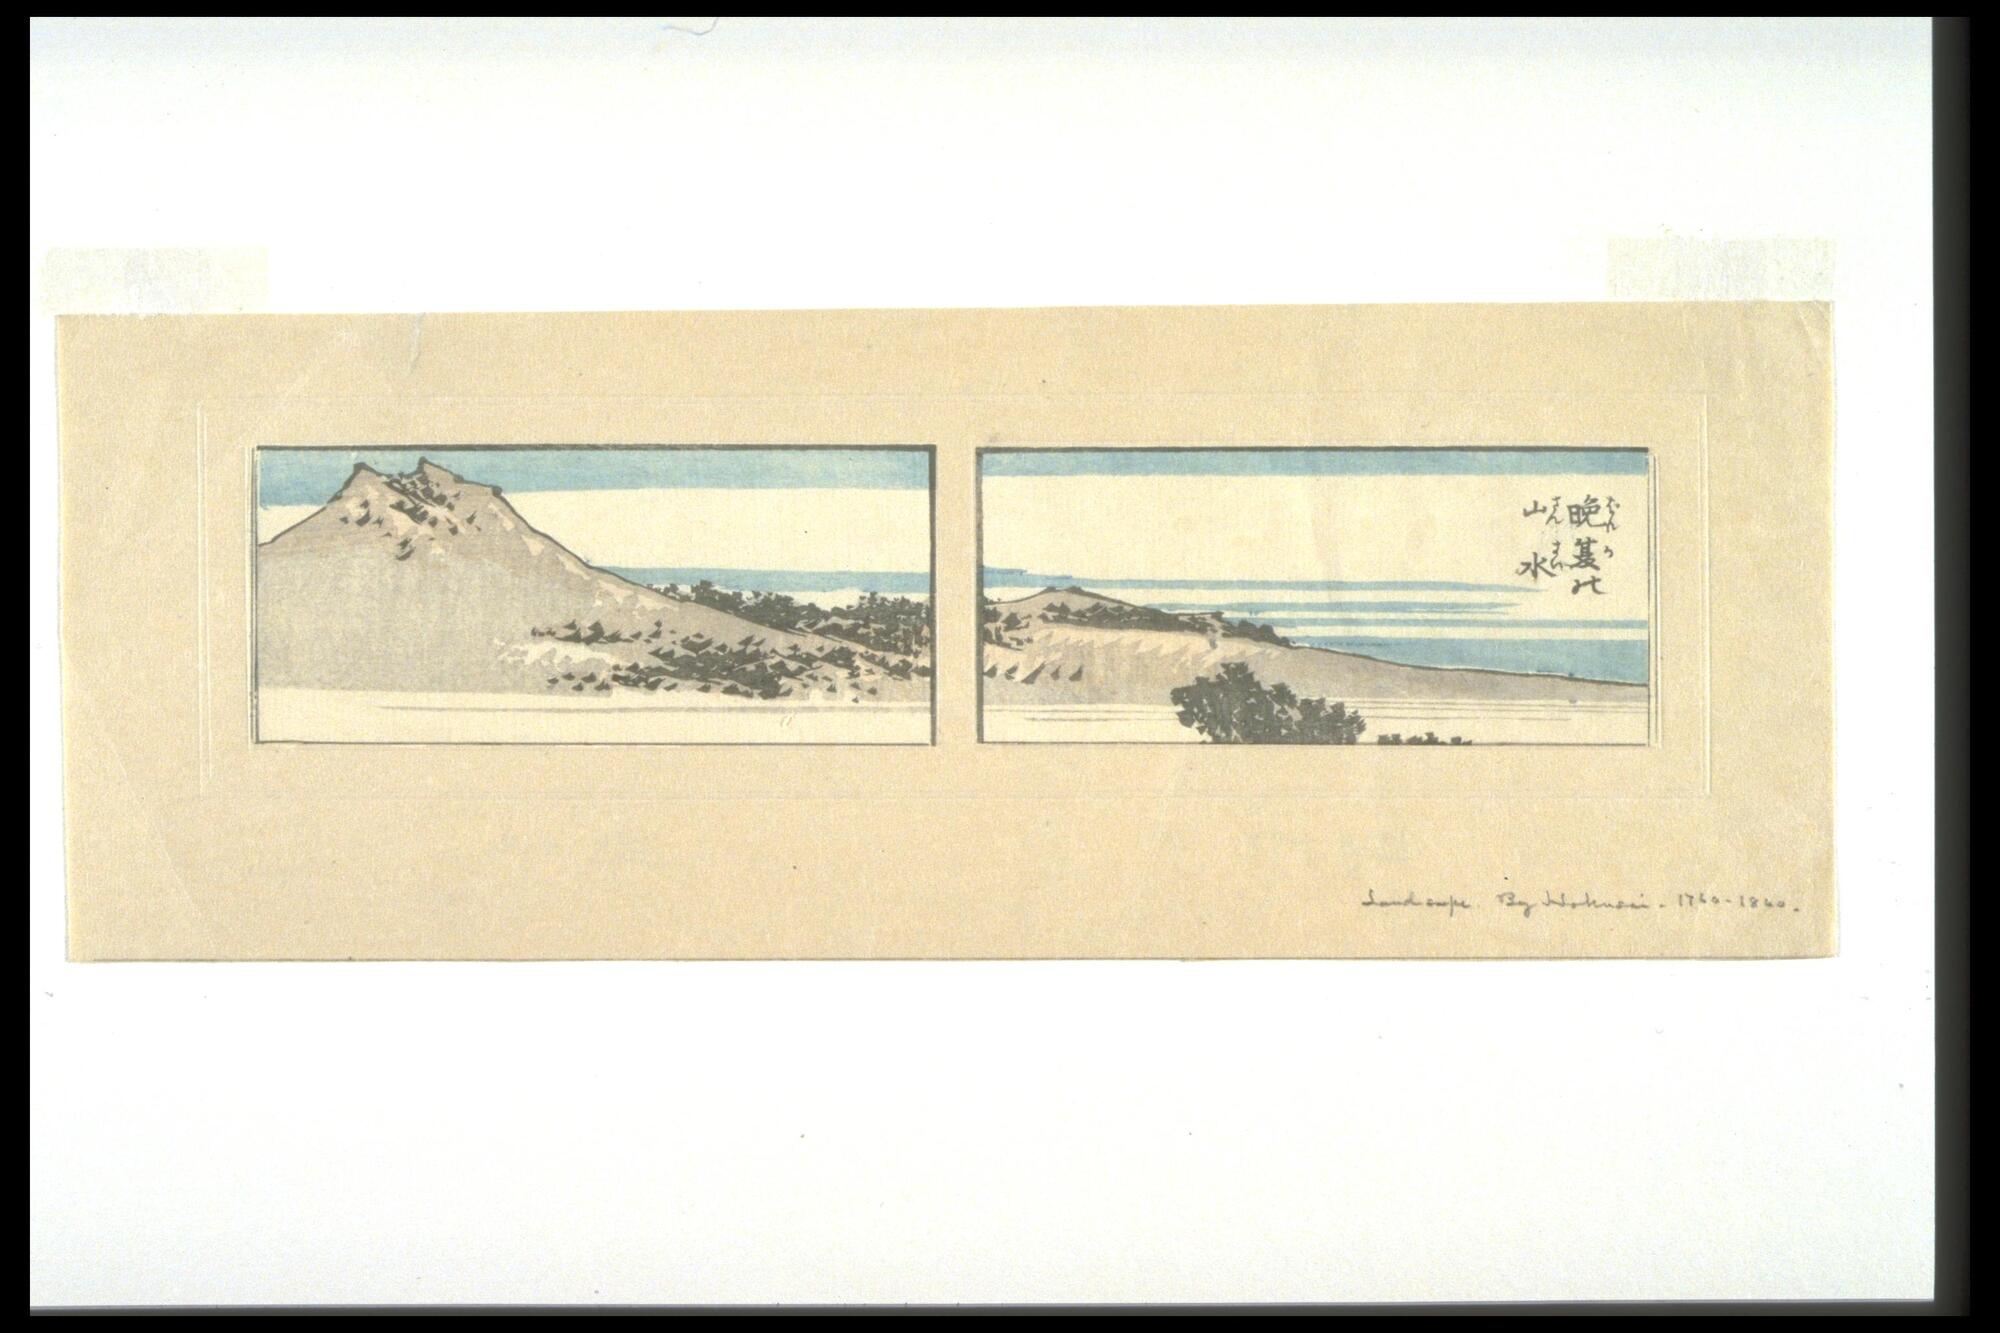 The print features a mountain, the edge of which creates a diagonal. A few plants are shown at the base of the mountain, and behind the mountain the sky is depicted with the colors of blue and white. The artist inscribed several calligraphic characters on the upper right-hand corner, which says "a scenery of the mountain and the water in the evening. (?)"